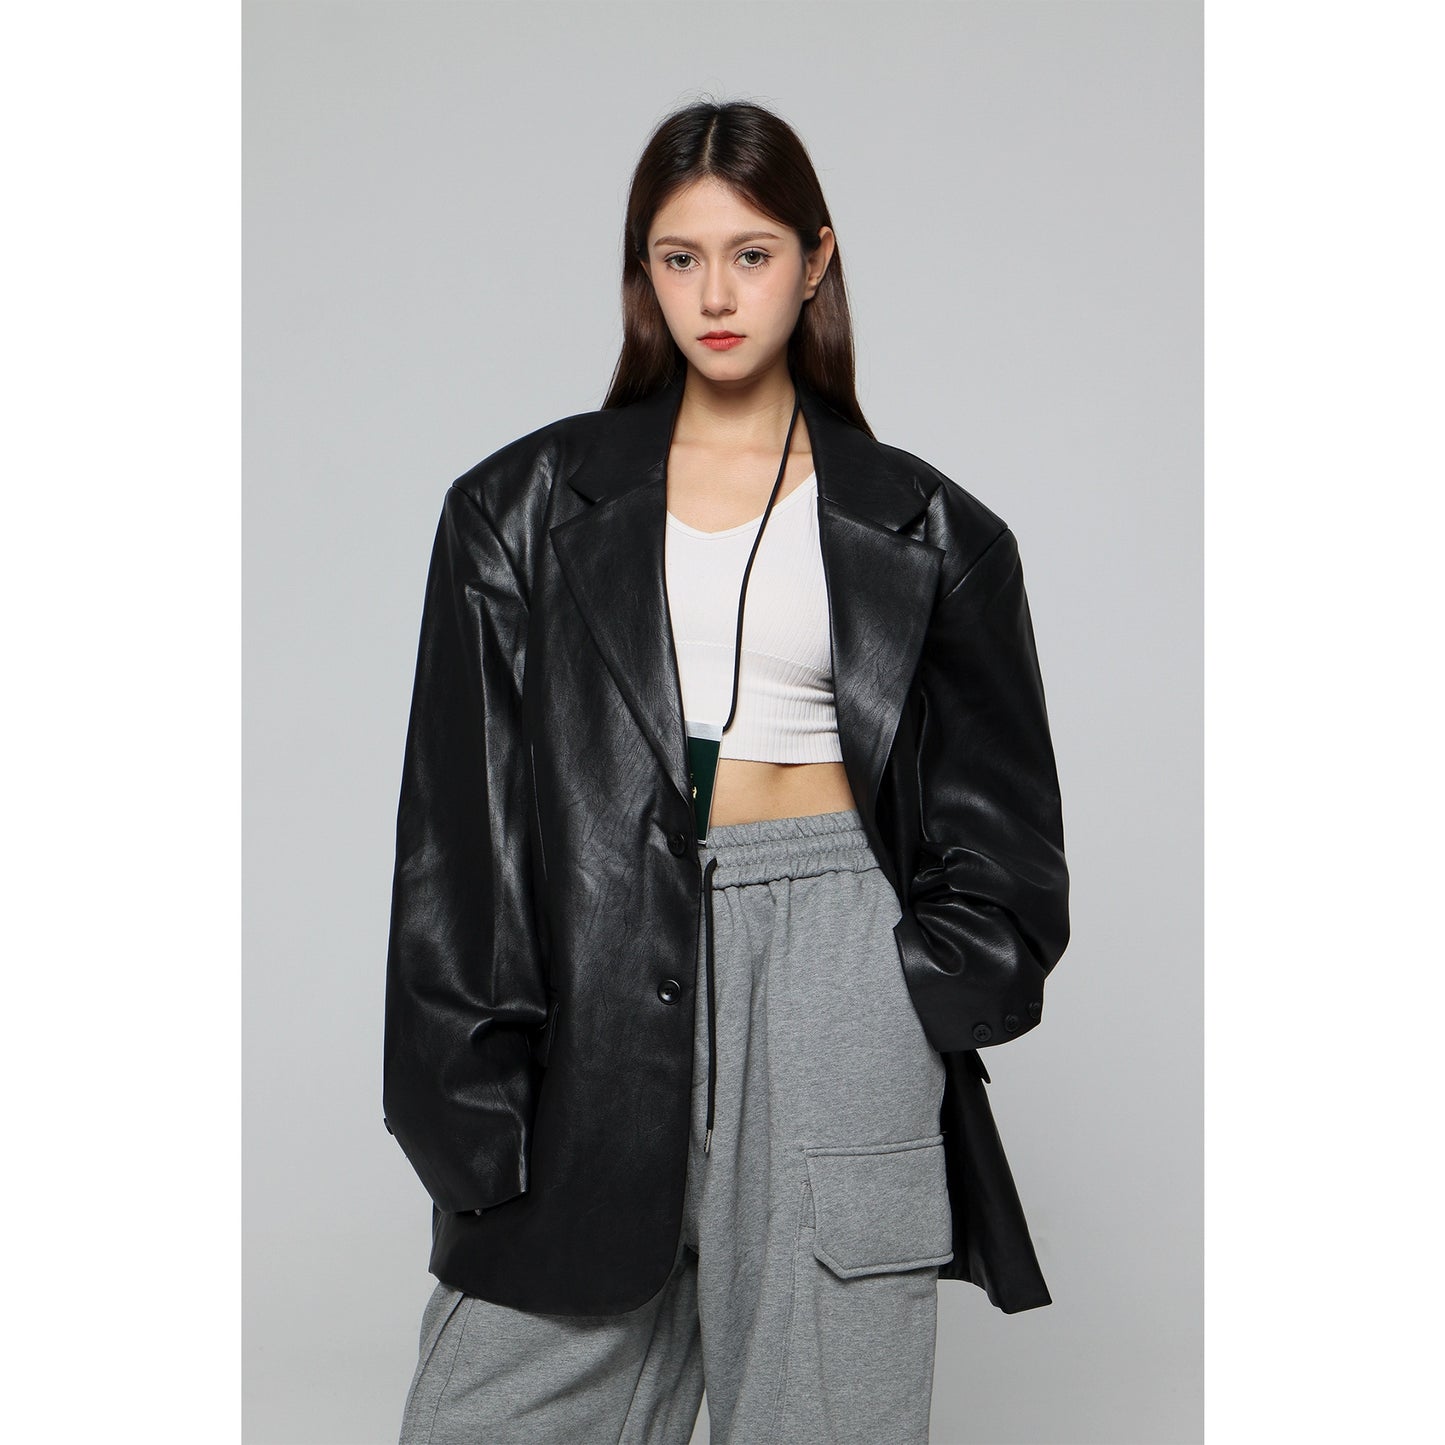 BOOGOOVOGUE early spring genderless wear with shoulder pads outline fashionable leather jacket ruffian handsome leather suit jacket